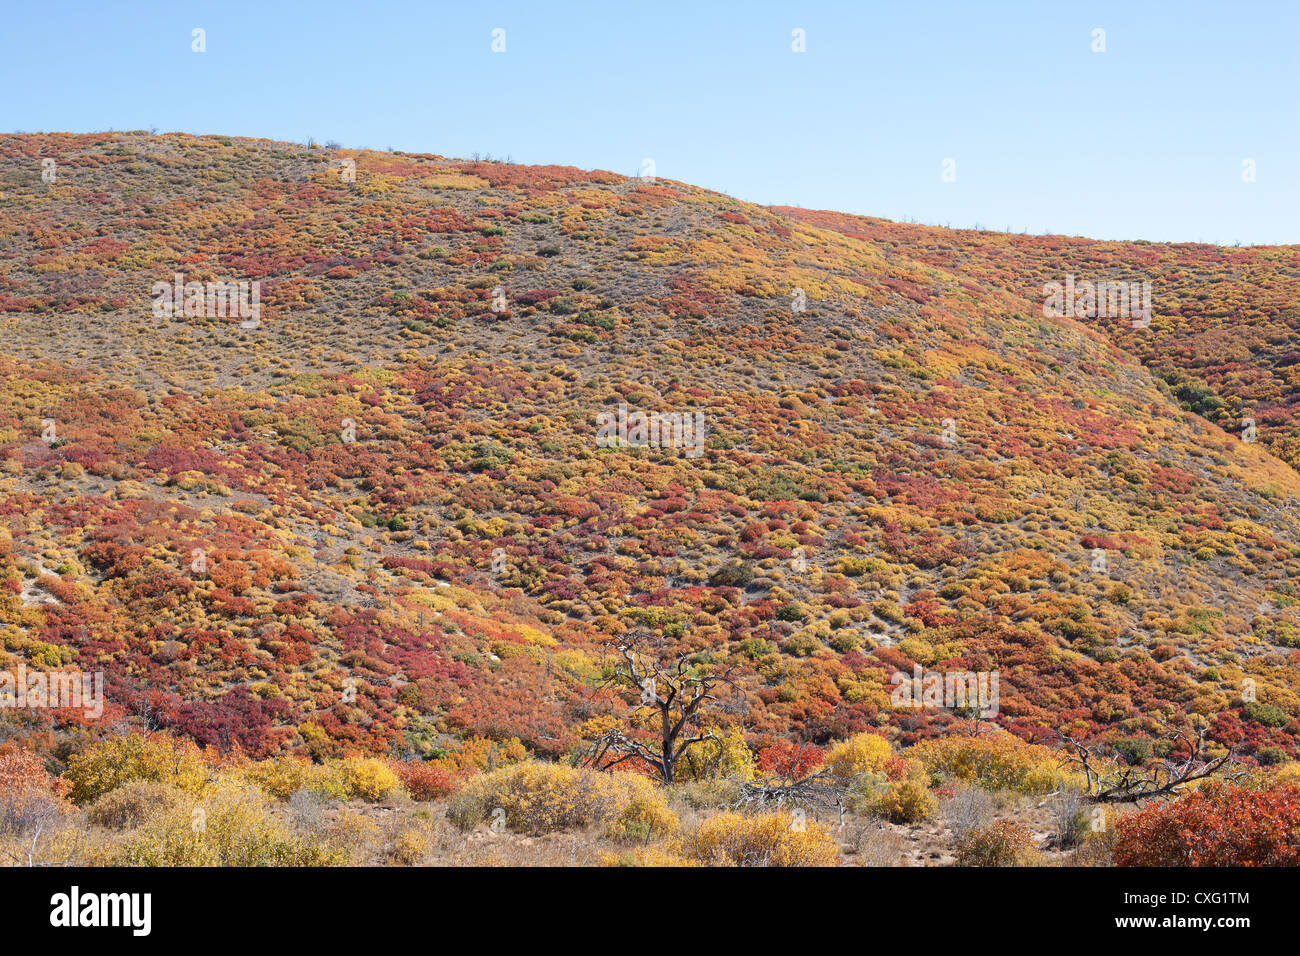 Lonely dead tree surrounded by shrubs in vivid autumnal colors. Mesa Verde National Park, Montezuma County, Colorado, USA. Stock Photo